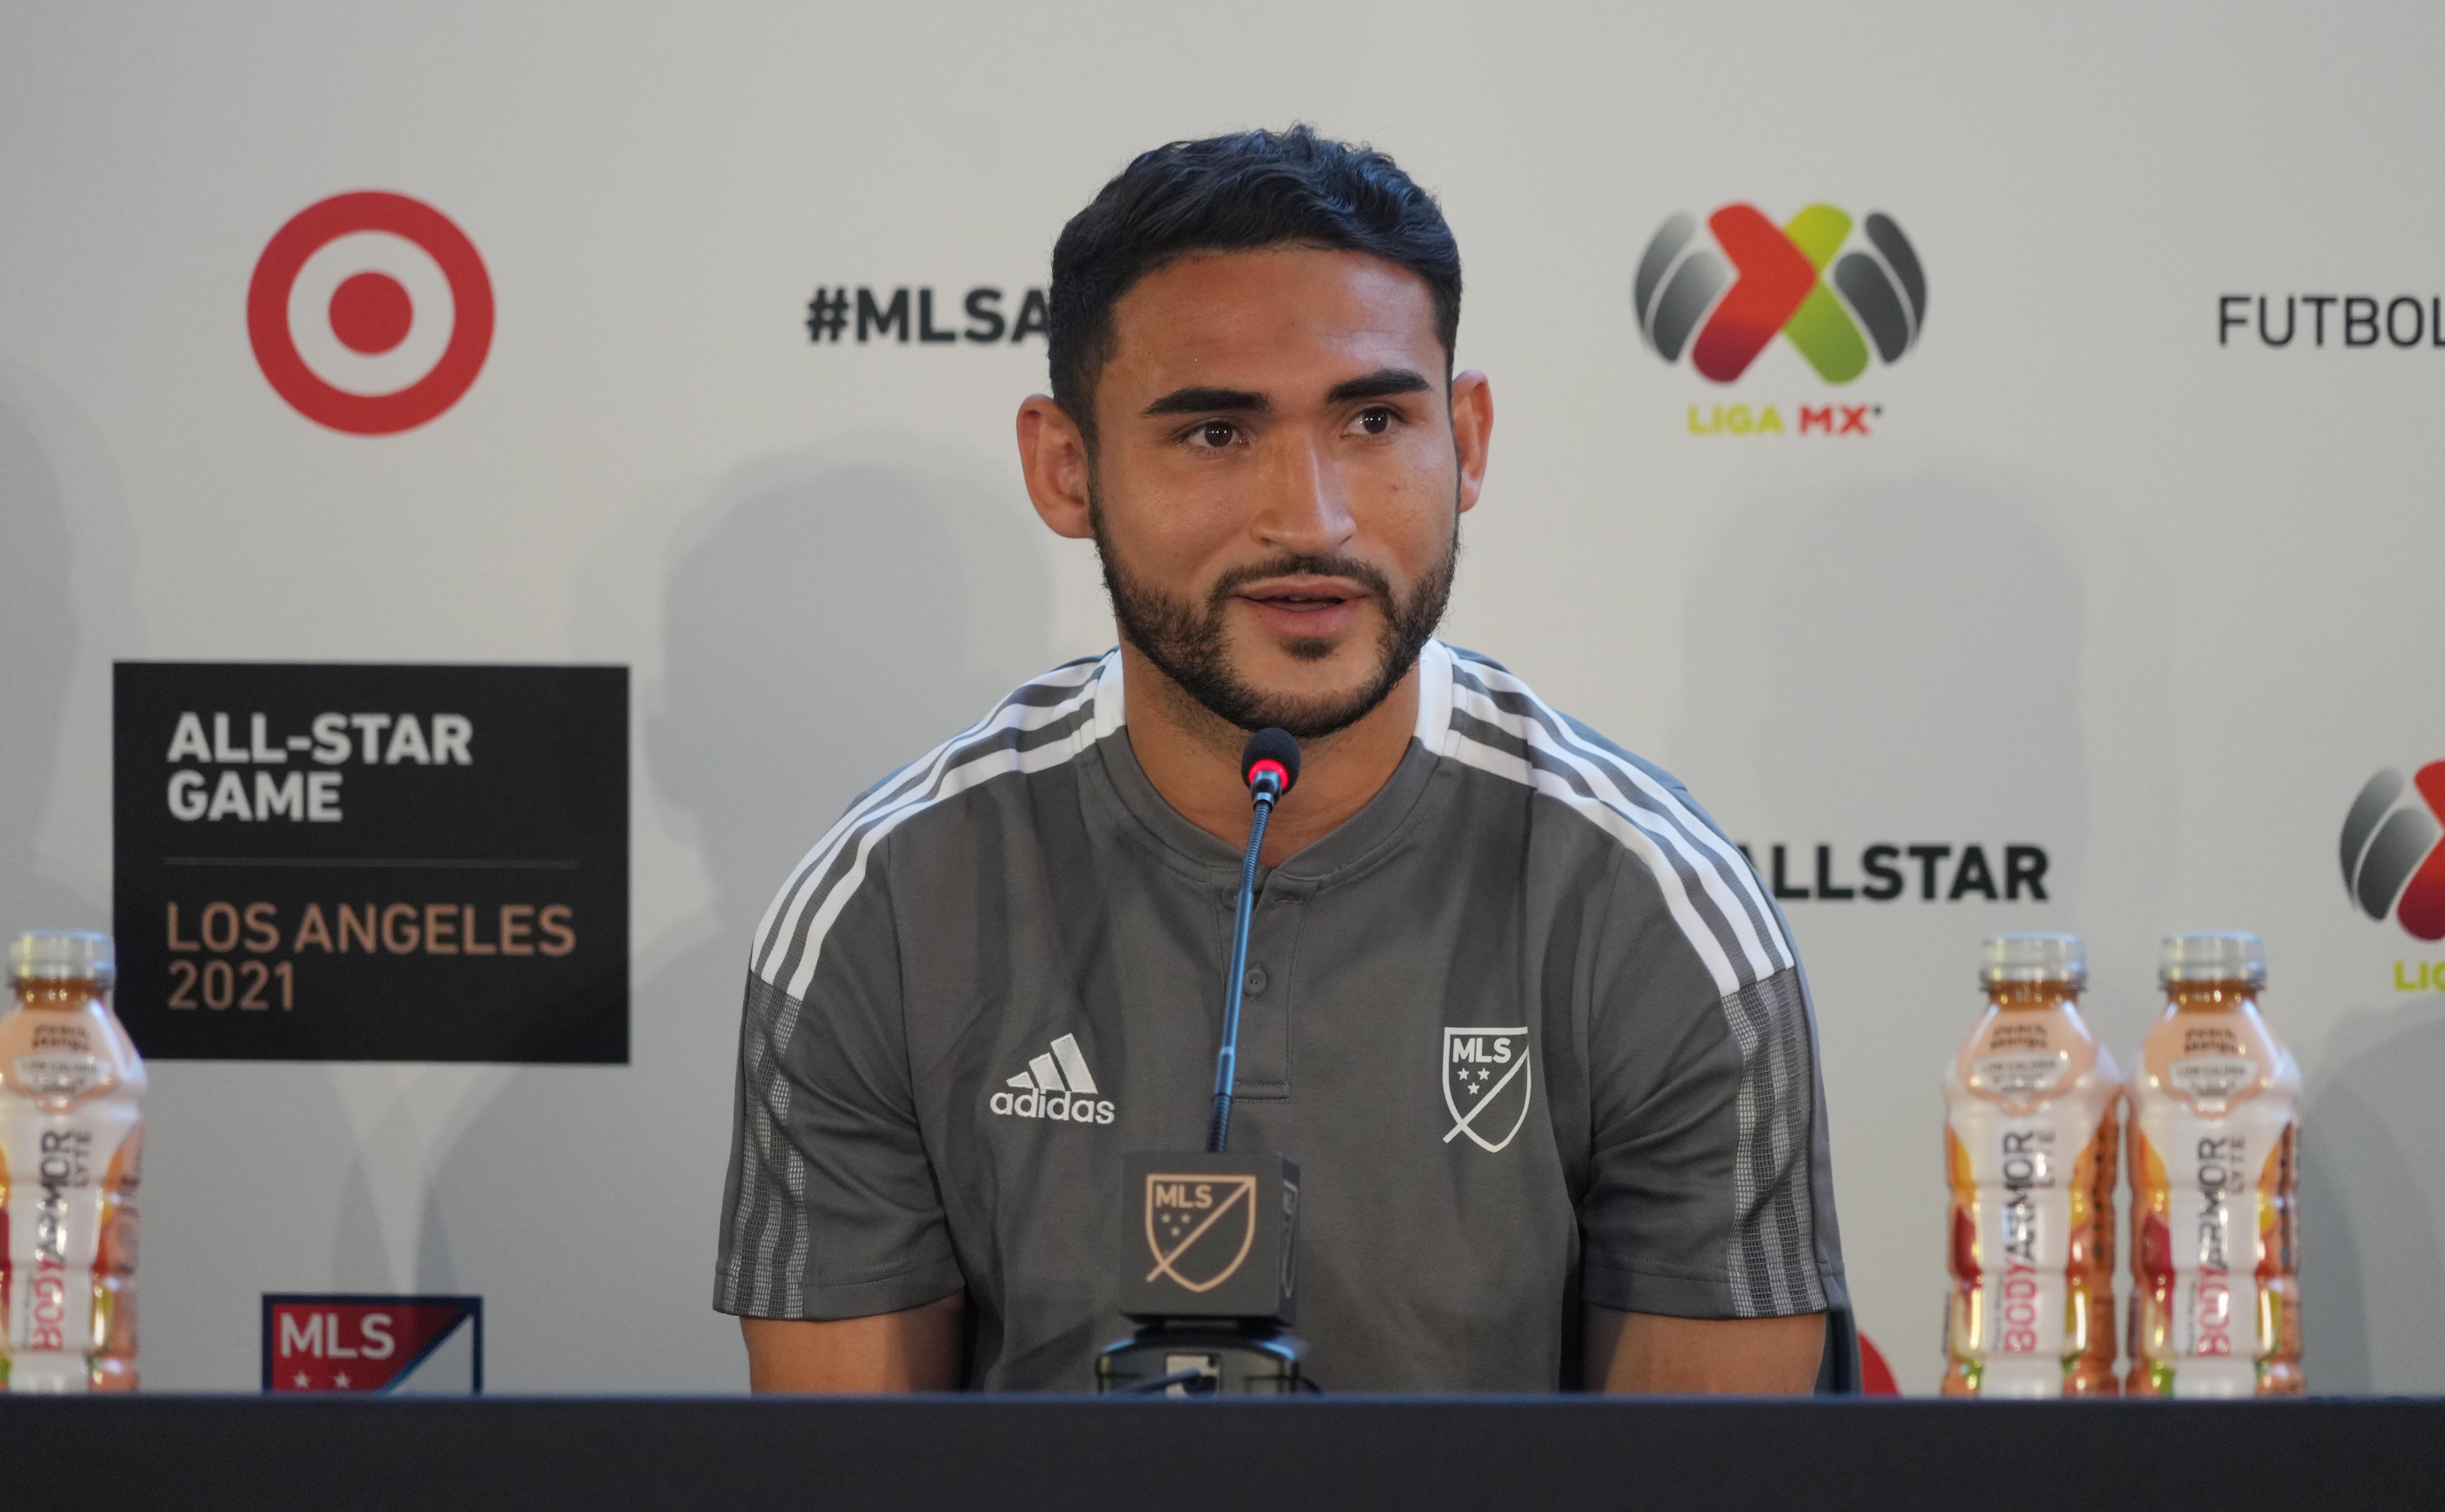 MLS: MLS All-Star Game Press Conference